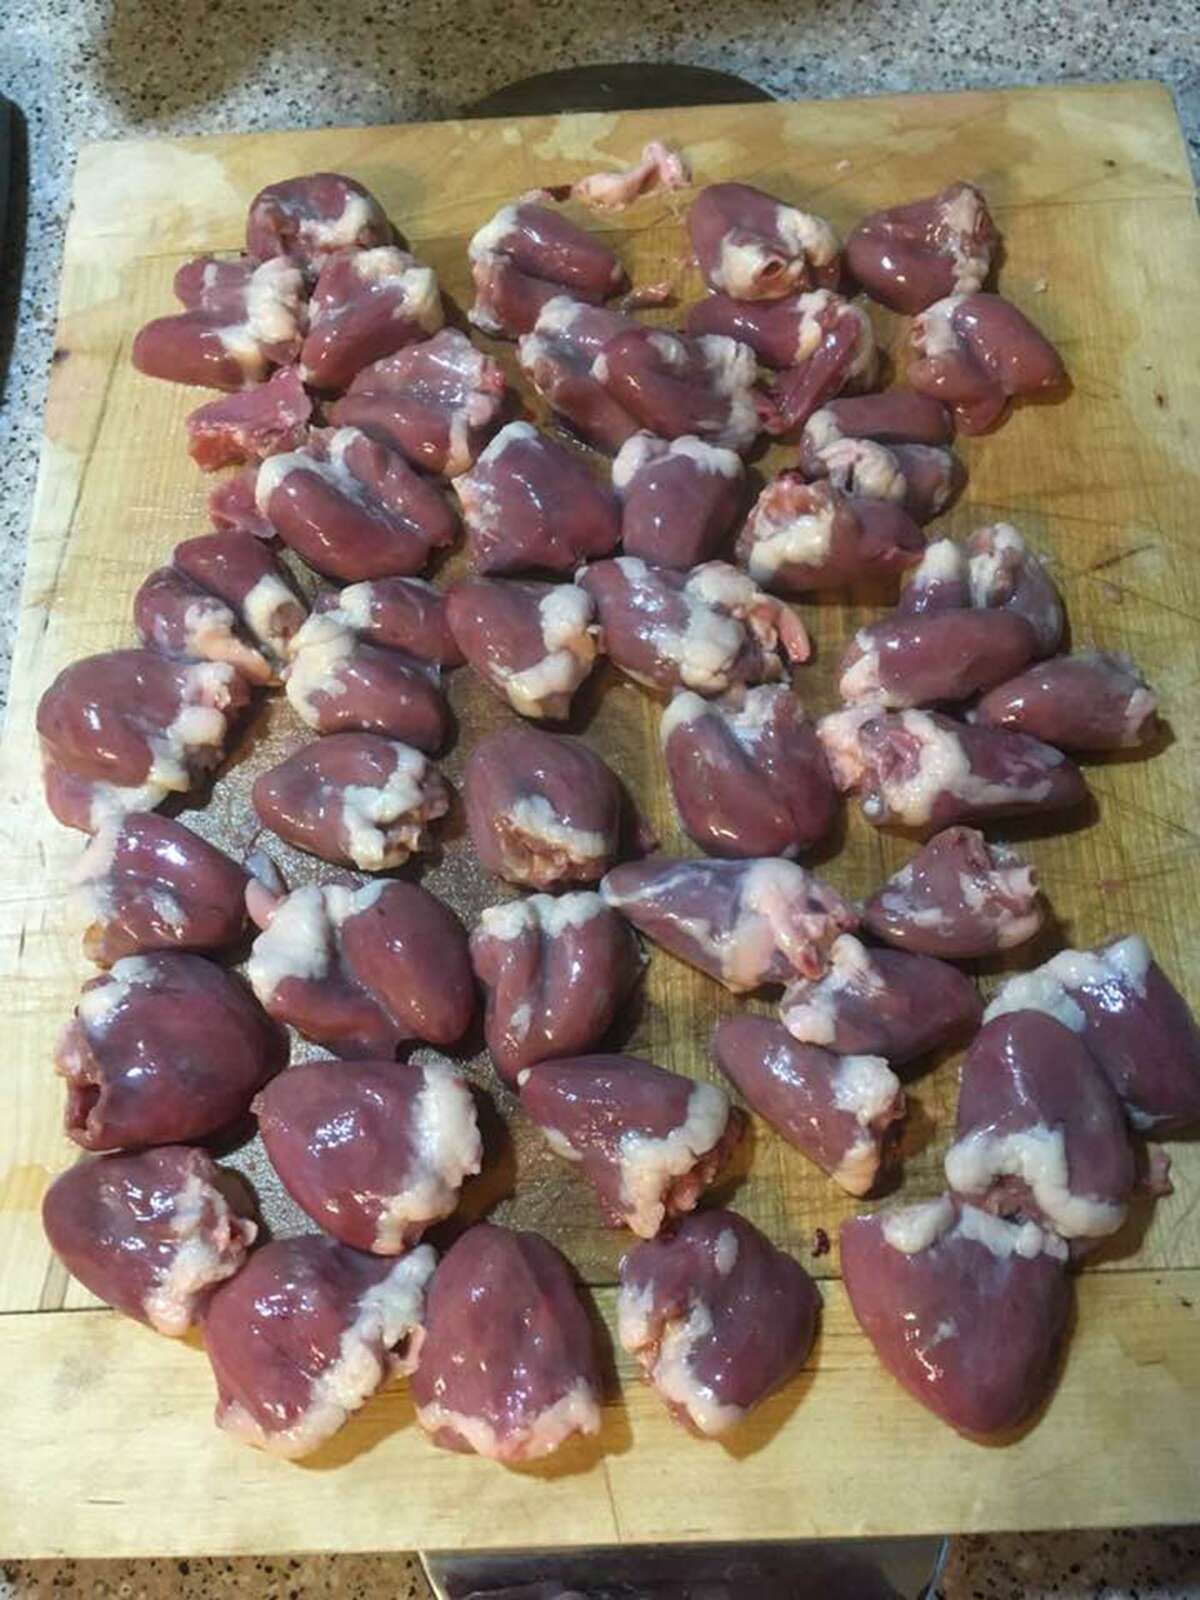 A single package of chicken hearts may have 40 or more bite-size morsels of meat. Chicken hearts are one of the more affordable meats, selling for about $1 per pound.